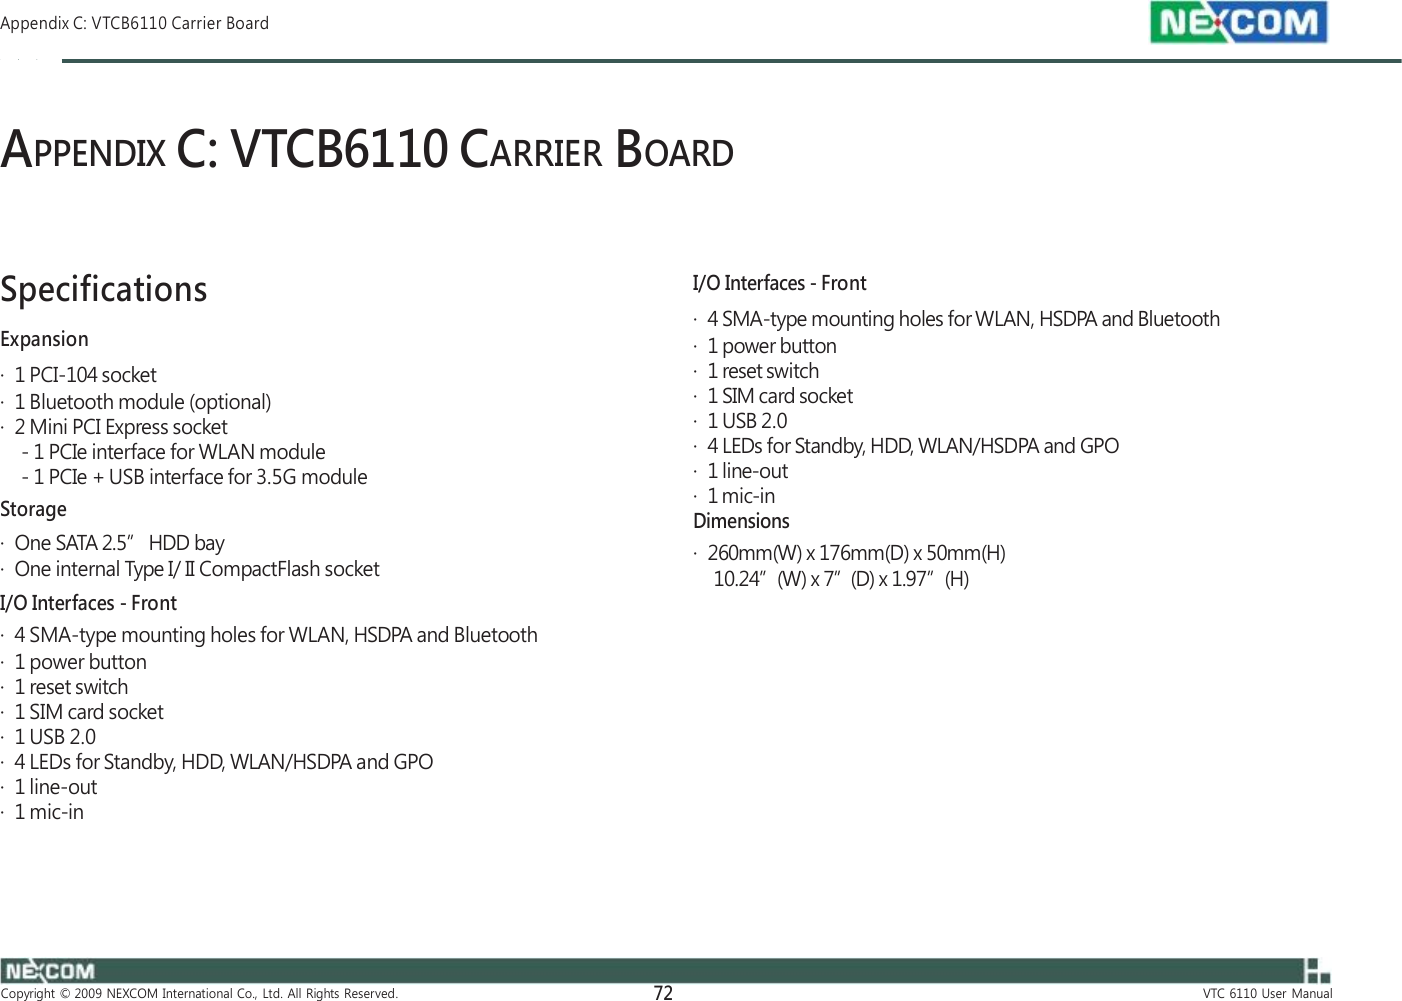  Appendix C: VTCB6110 Carrier Board    APPENDIX C: VTCB6110 CARRIER BOARD    Specifications Expansion ·  1 PCI-104 socket ·  1 Bluetooth module (optional) ·  2 Mini PCI Express socket - 1 PCIe interface for WLAN module - 1 PCIe + USB interface for 3.5G module Storage ·  One SATA 2.5” HDD bay ·  One internal Type I/ II CompactFlash socket    I/O Interfaces - Front ·  4 SMA-type mounting holes for WLAN, HSDPA and Bluetooth ·  1 power button ·  1 reset switch ·  1 SIM card socket ·  1 USB 2.0 ·  4 LEDs for Standby, HDD, WLAN/HSDPA and GPO ·  1 line-out ·  1 mic-in Dimensions ·  260mm(W) x 176mm(D) x 50mm(H) 10.24”(W) x 7”(D) x 1.97”(H) I/O Interfaces - Front ·  4 SMA-type mounting holes for WLAN, HSDPA and Bluetooth ·  1 power button ·  1 reset switch ·  1 SIM card socket ·  1 USB 2.0 ·  4 LEDs for Standby, HDD, WLAN/HSDPA and GPO ·  1 line-out ·  1 mic-in       Copyright  ©  2009  NEXCOM  International  Co.,  Ltd.  All  Rights  Reserved. 72 VTC  6110  User  Manual 